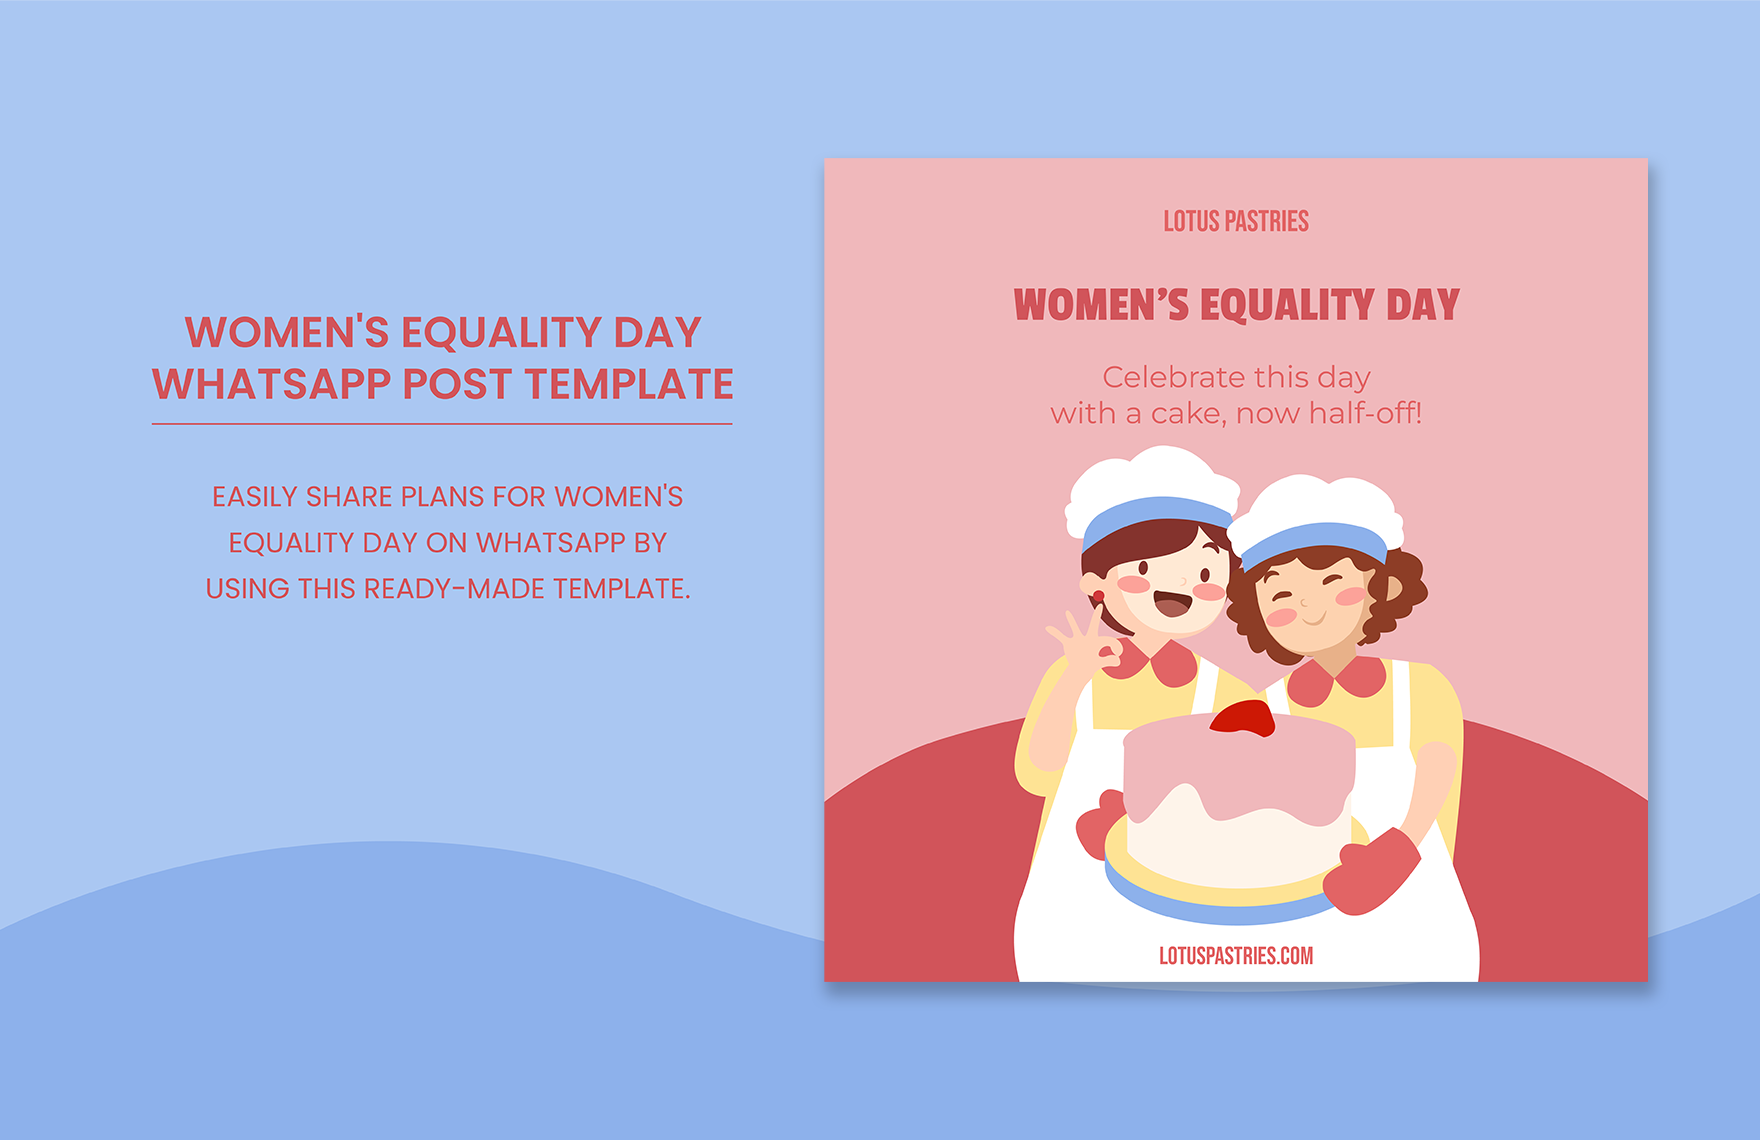 Free Women's Equality Day WhatsApp Post Template in PDF, Illustrator, SVG, PNG